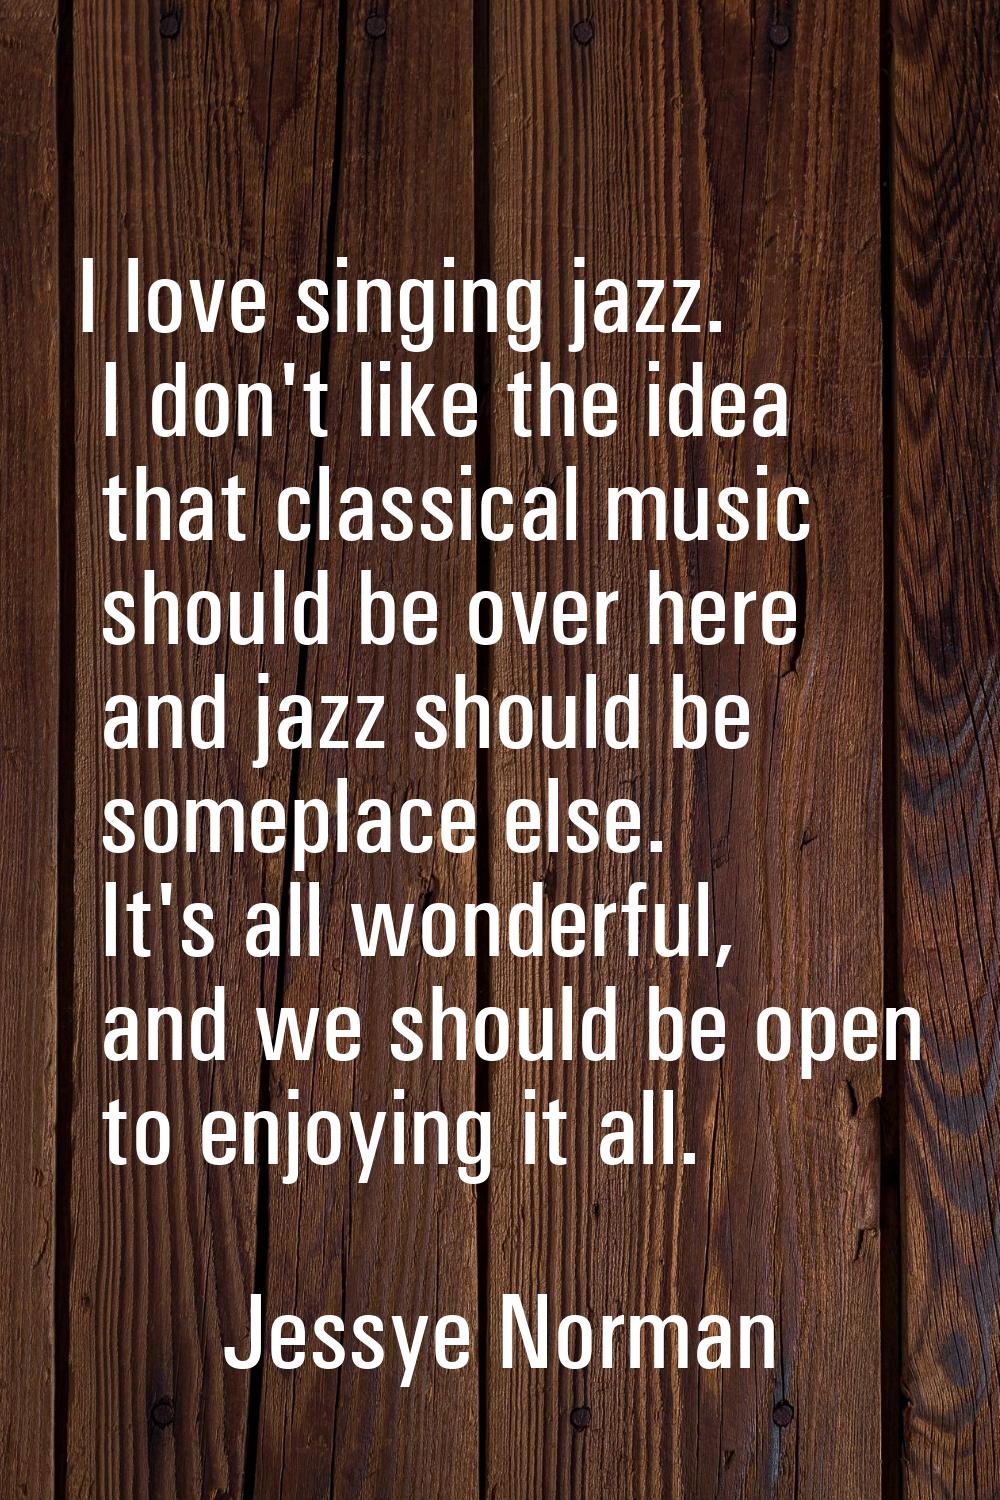 I love singing jazz. I don't like the idea that classical music should be over here and jazz should